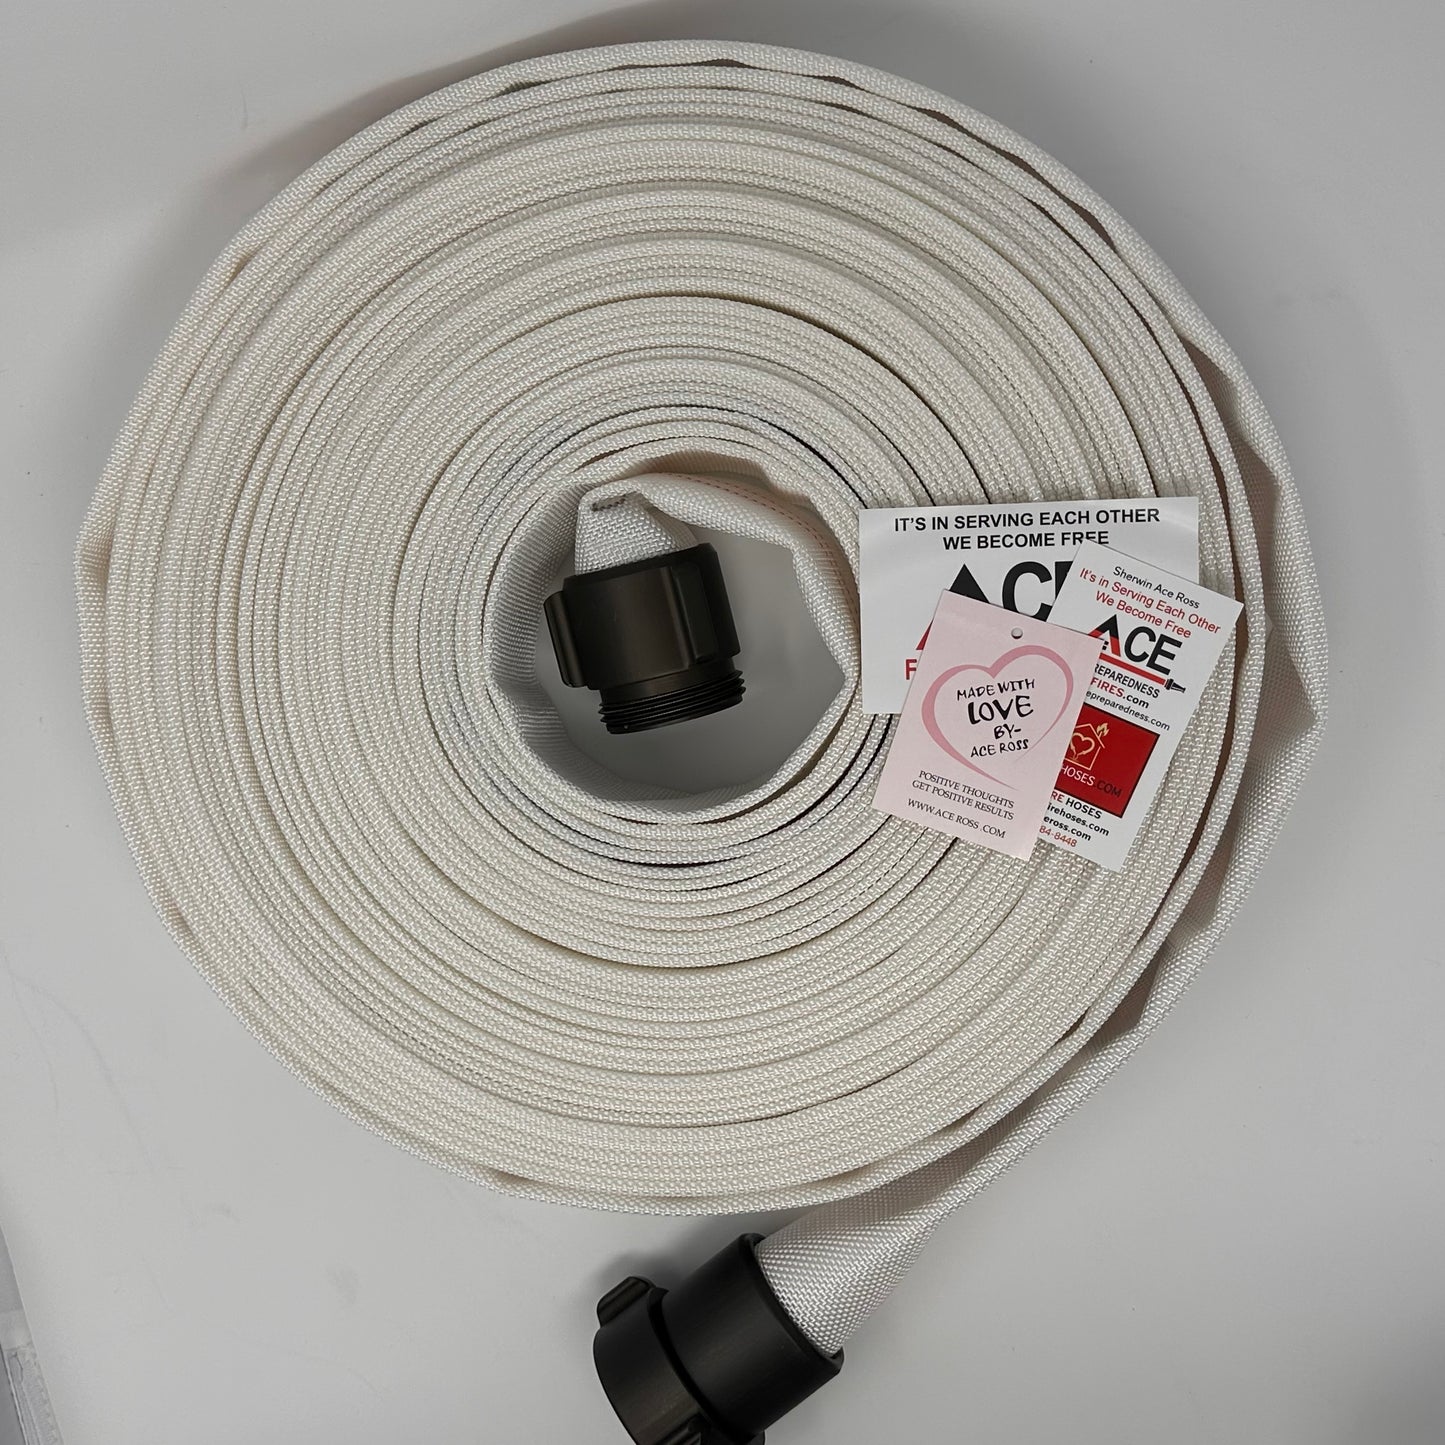 Professional Fire Hose 75' x 1.5”,FM Approved, NH /NST Aluminum Couplings,  TPU Lining, FM Approved for occupant use. – Ace Fire Preparedness Defense